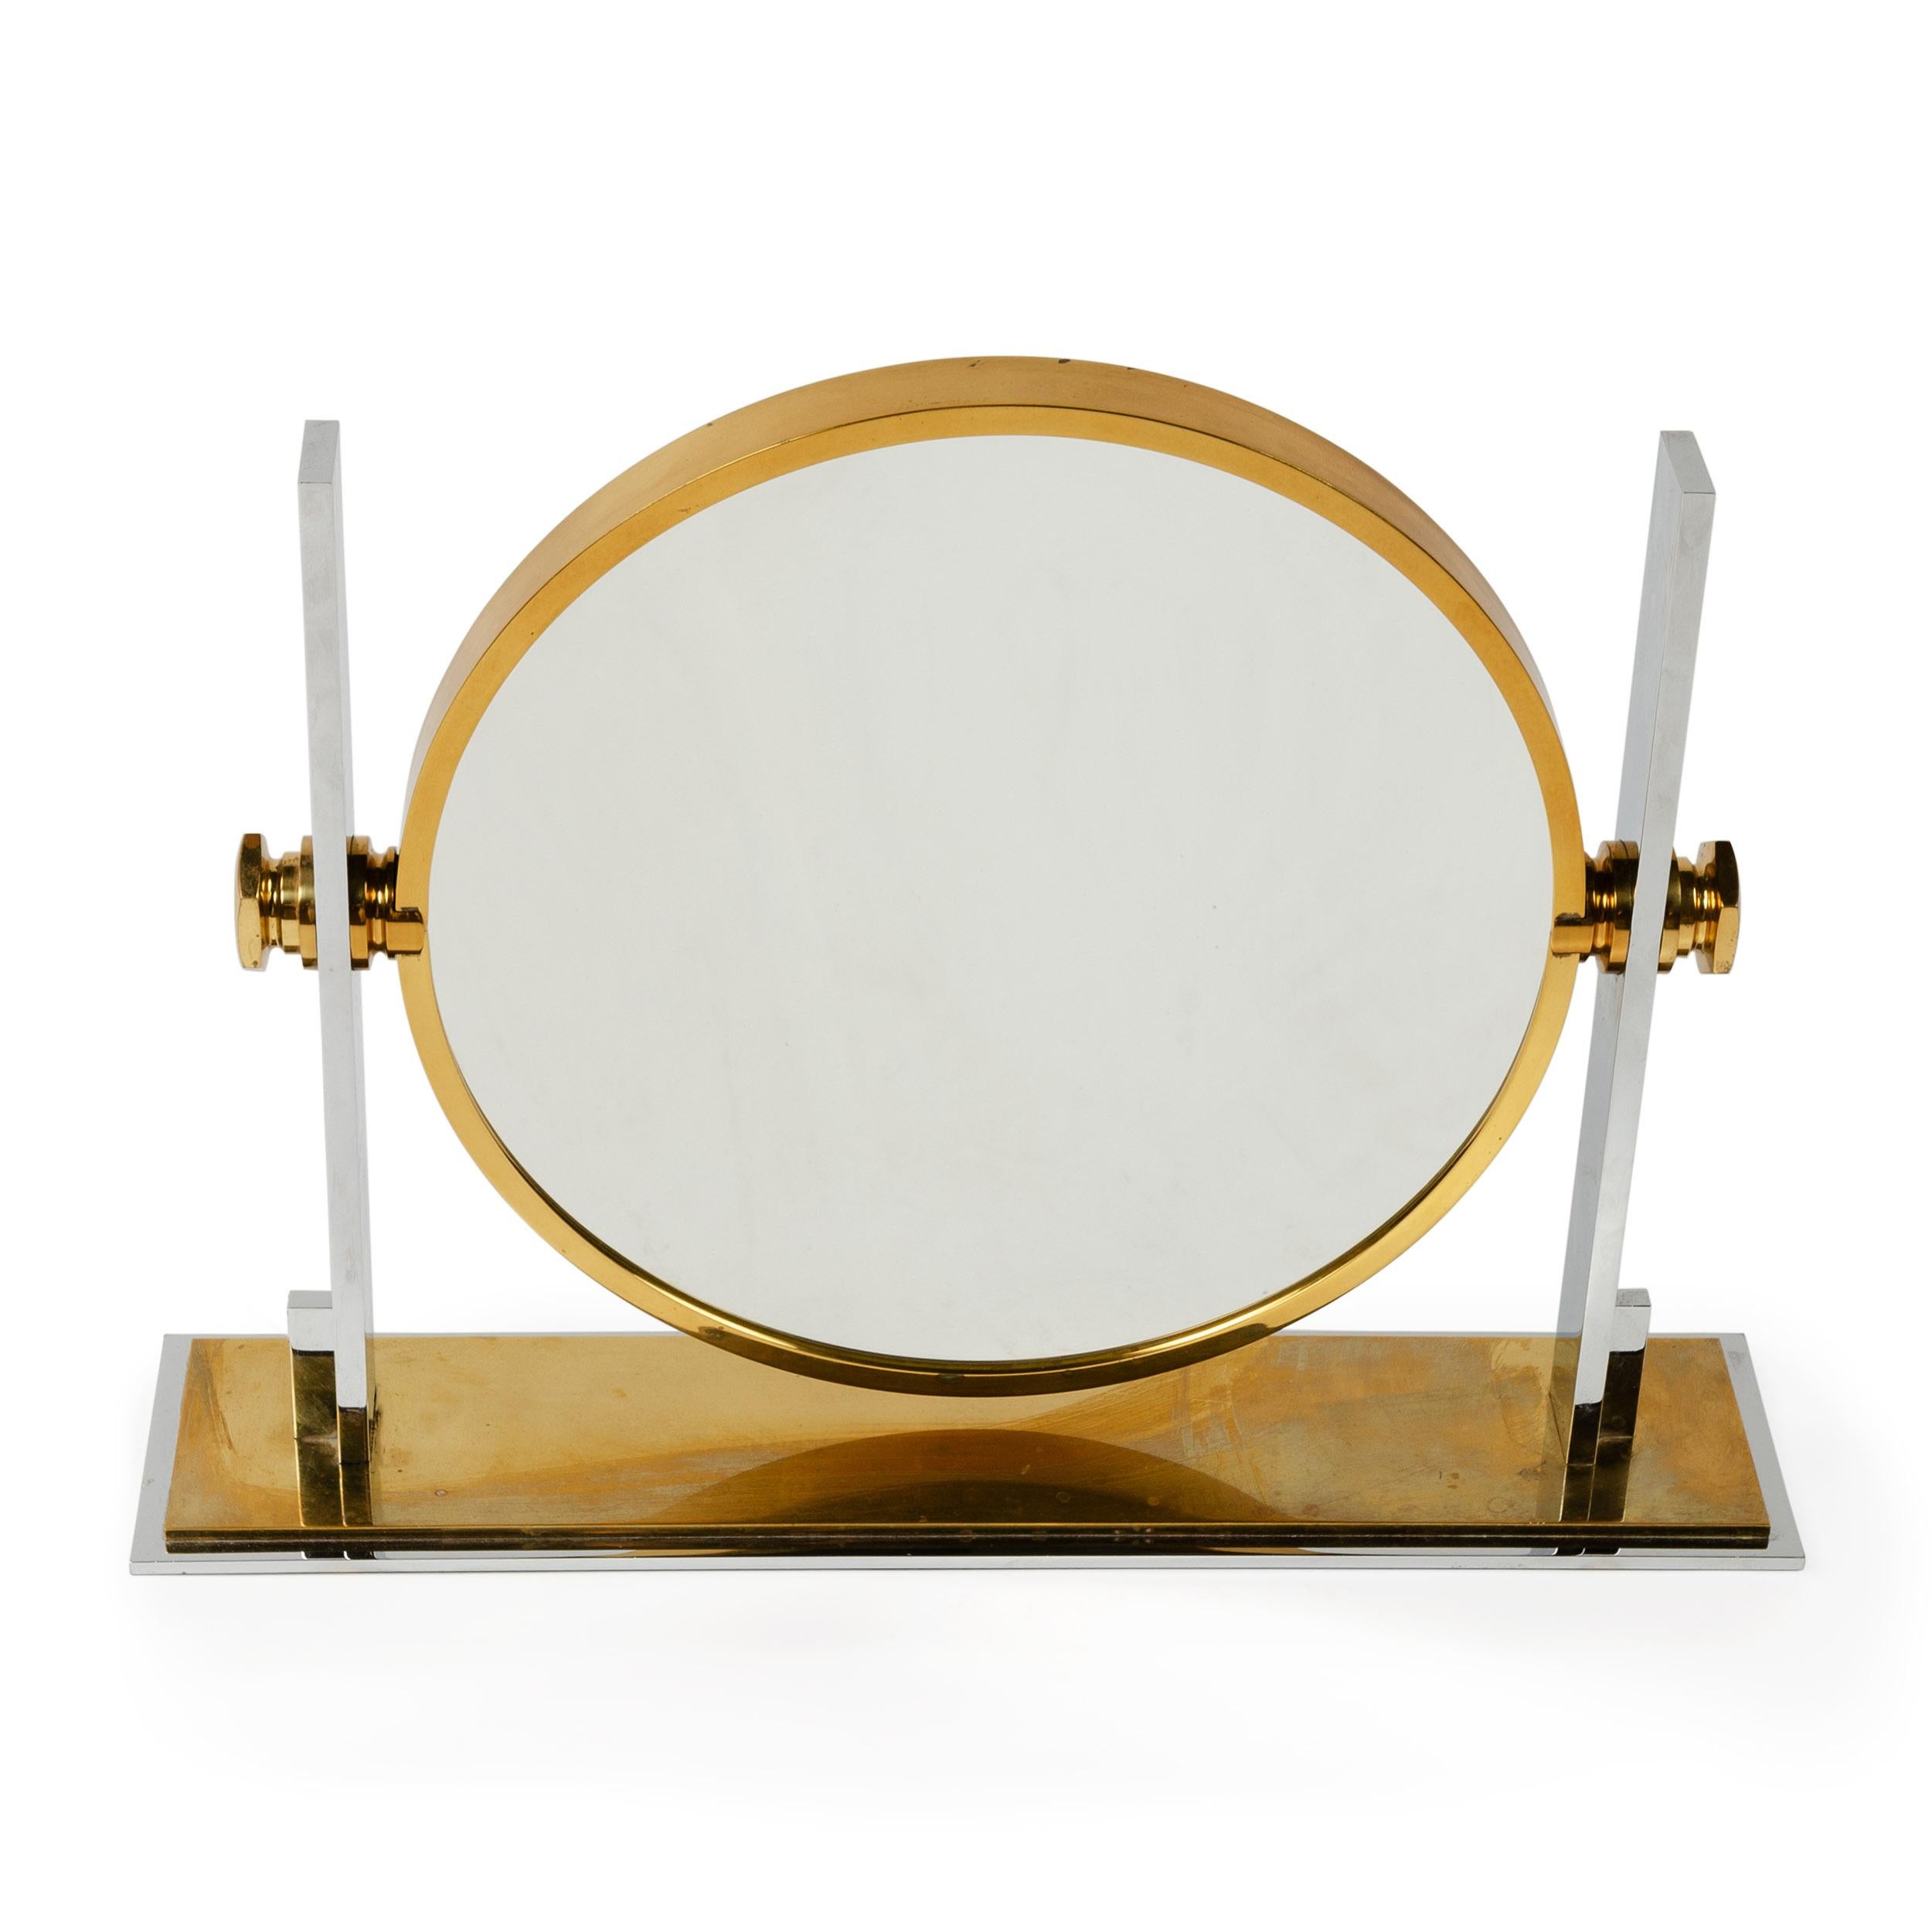 A solid brass and chrome-plated mirror that rotates to feature a 13.5